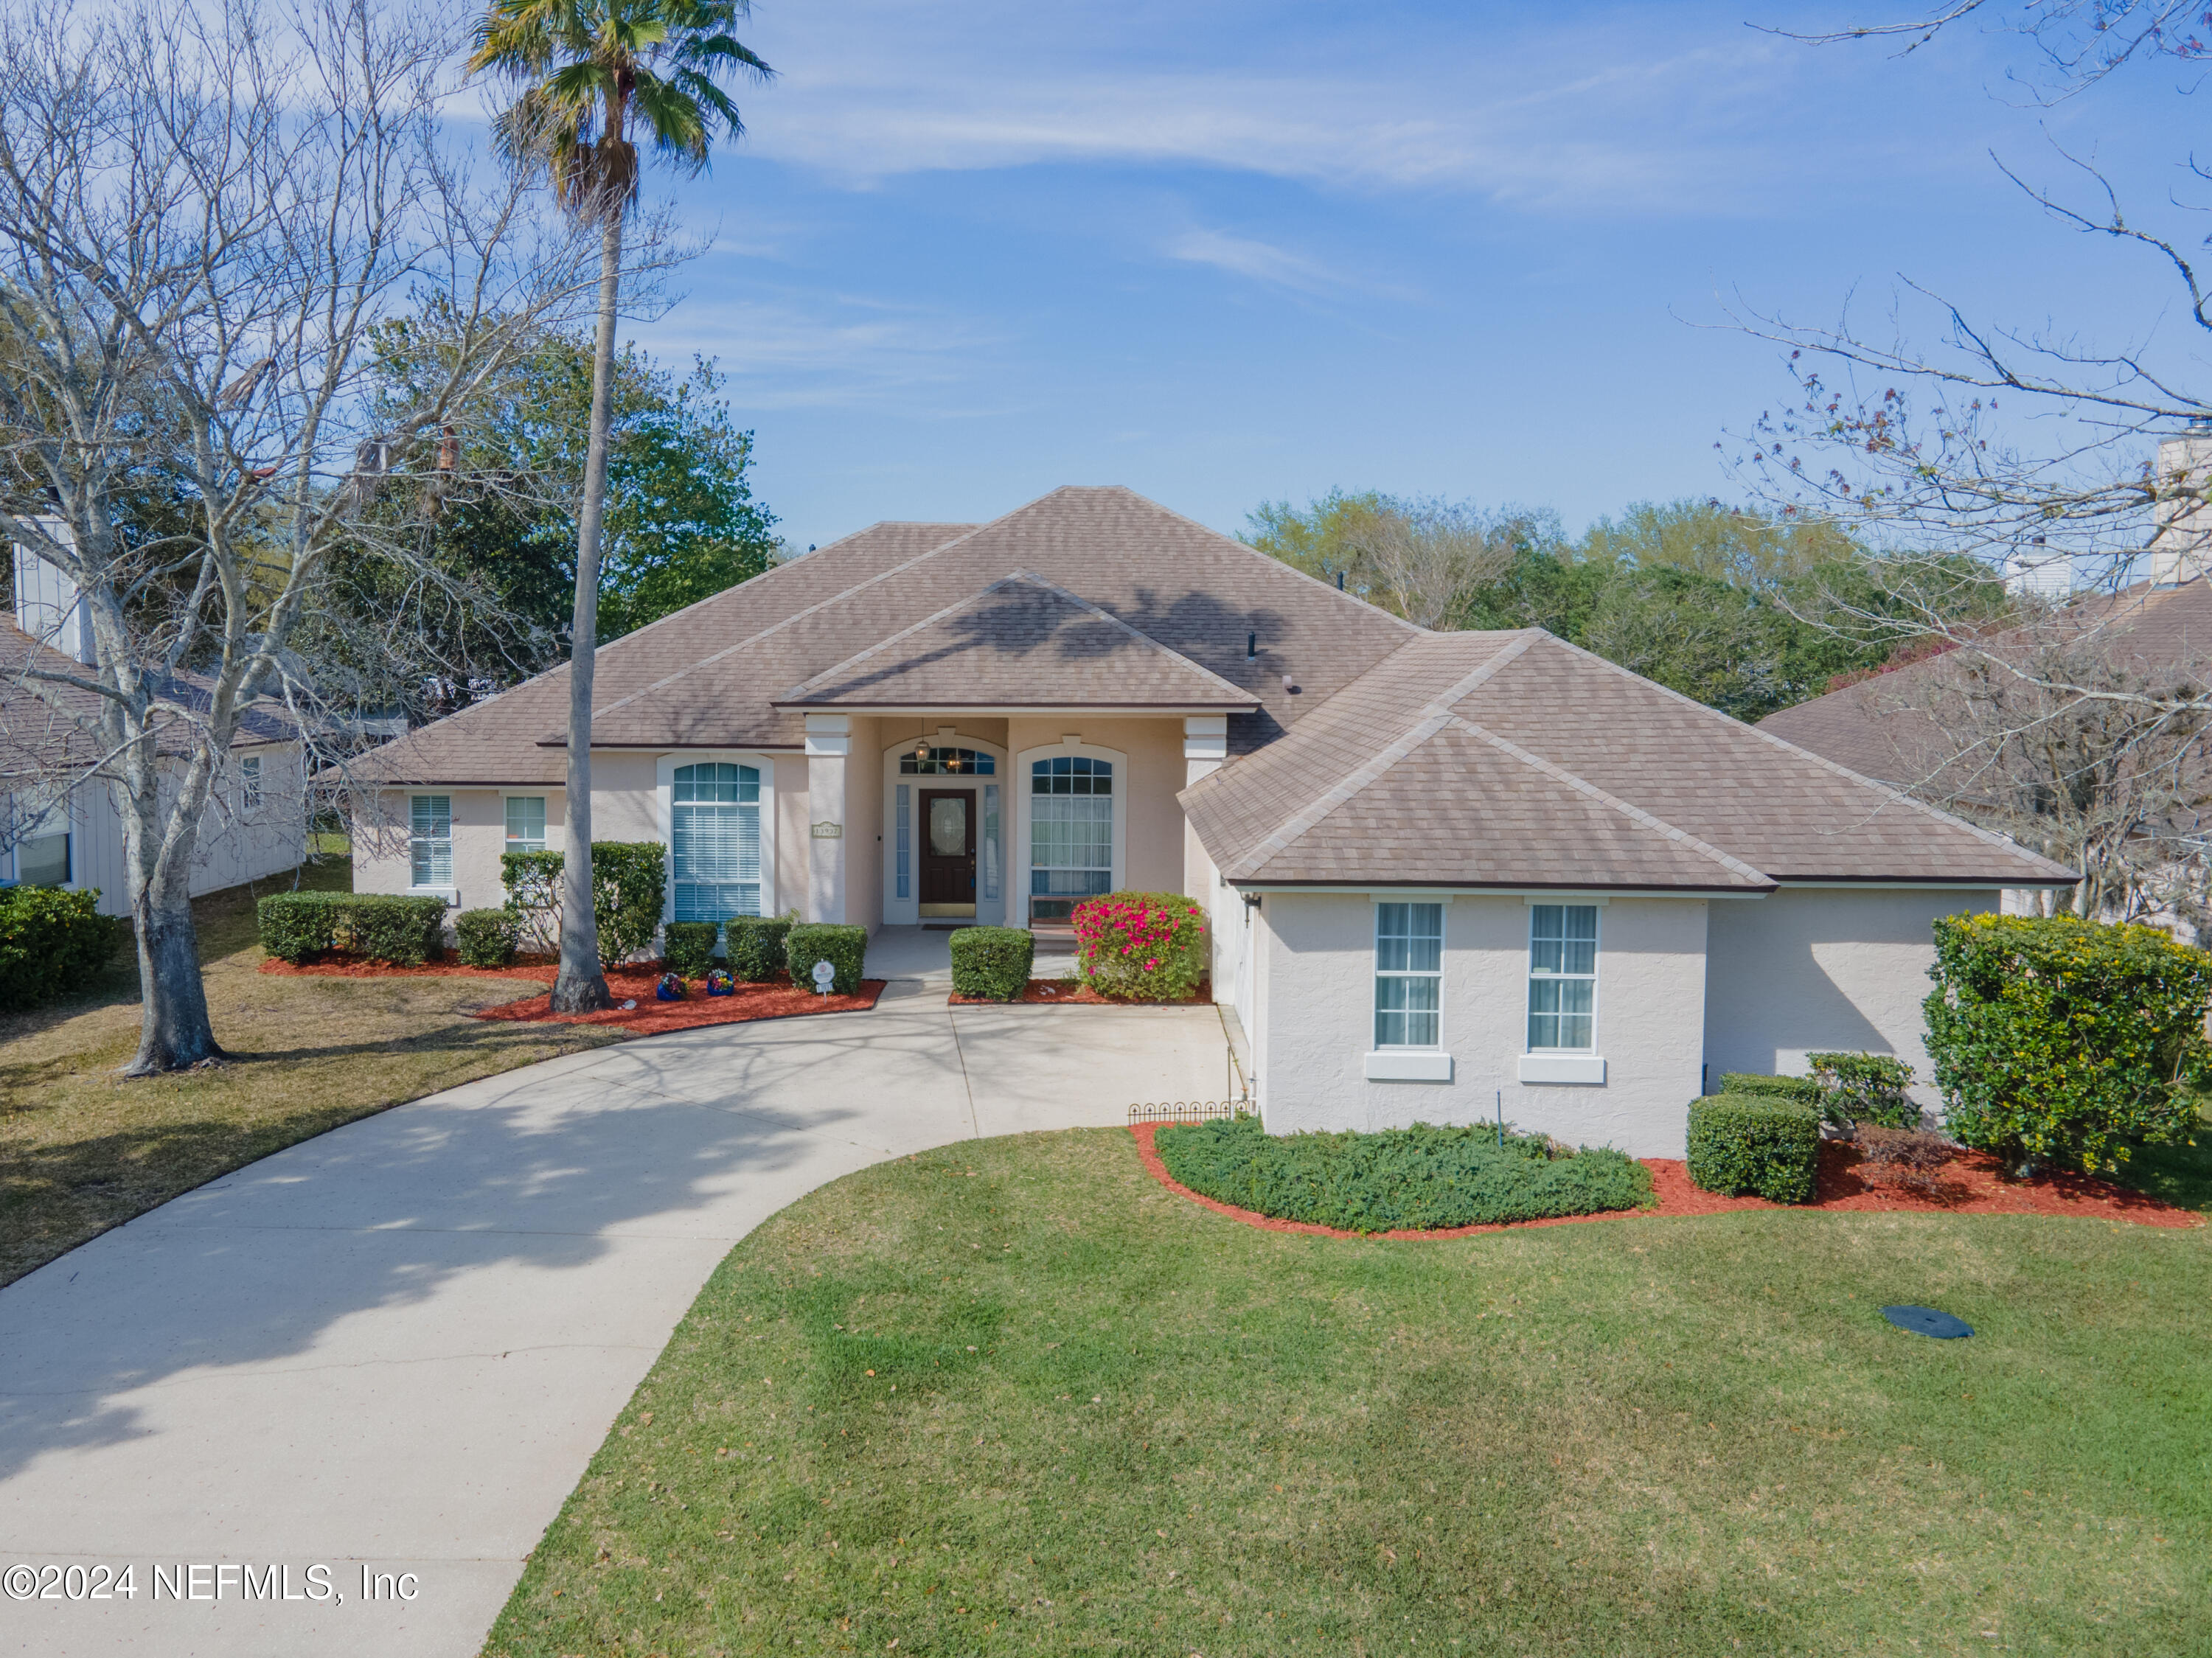 Jacksonville, FL home for sale located at 13937 SOUND OVERLOOK Drive N, Jacksonville, FL 32224